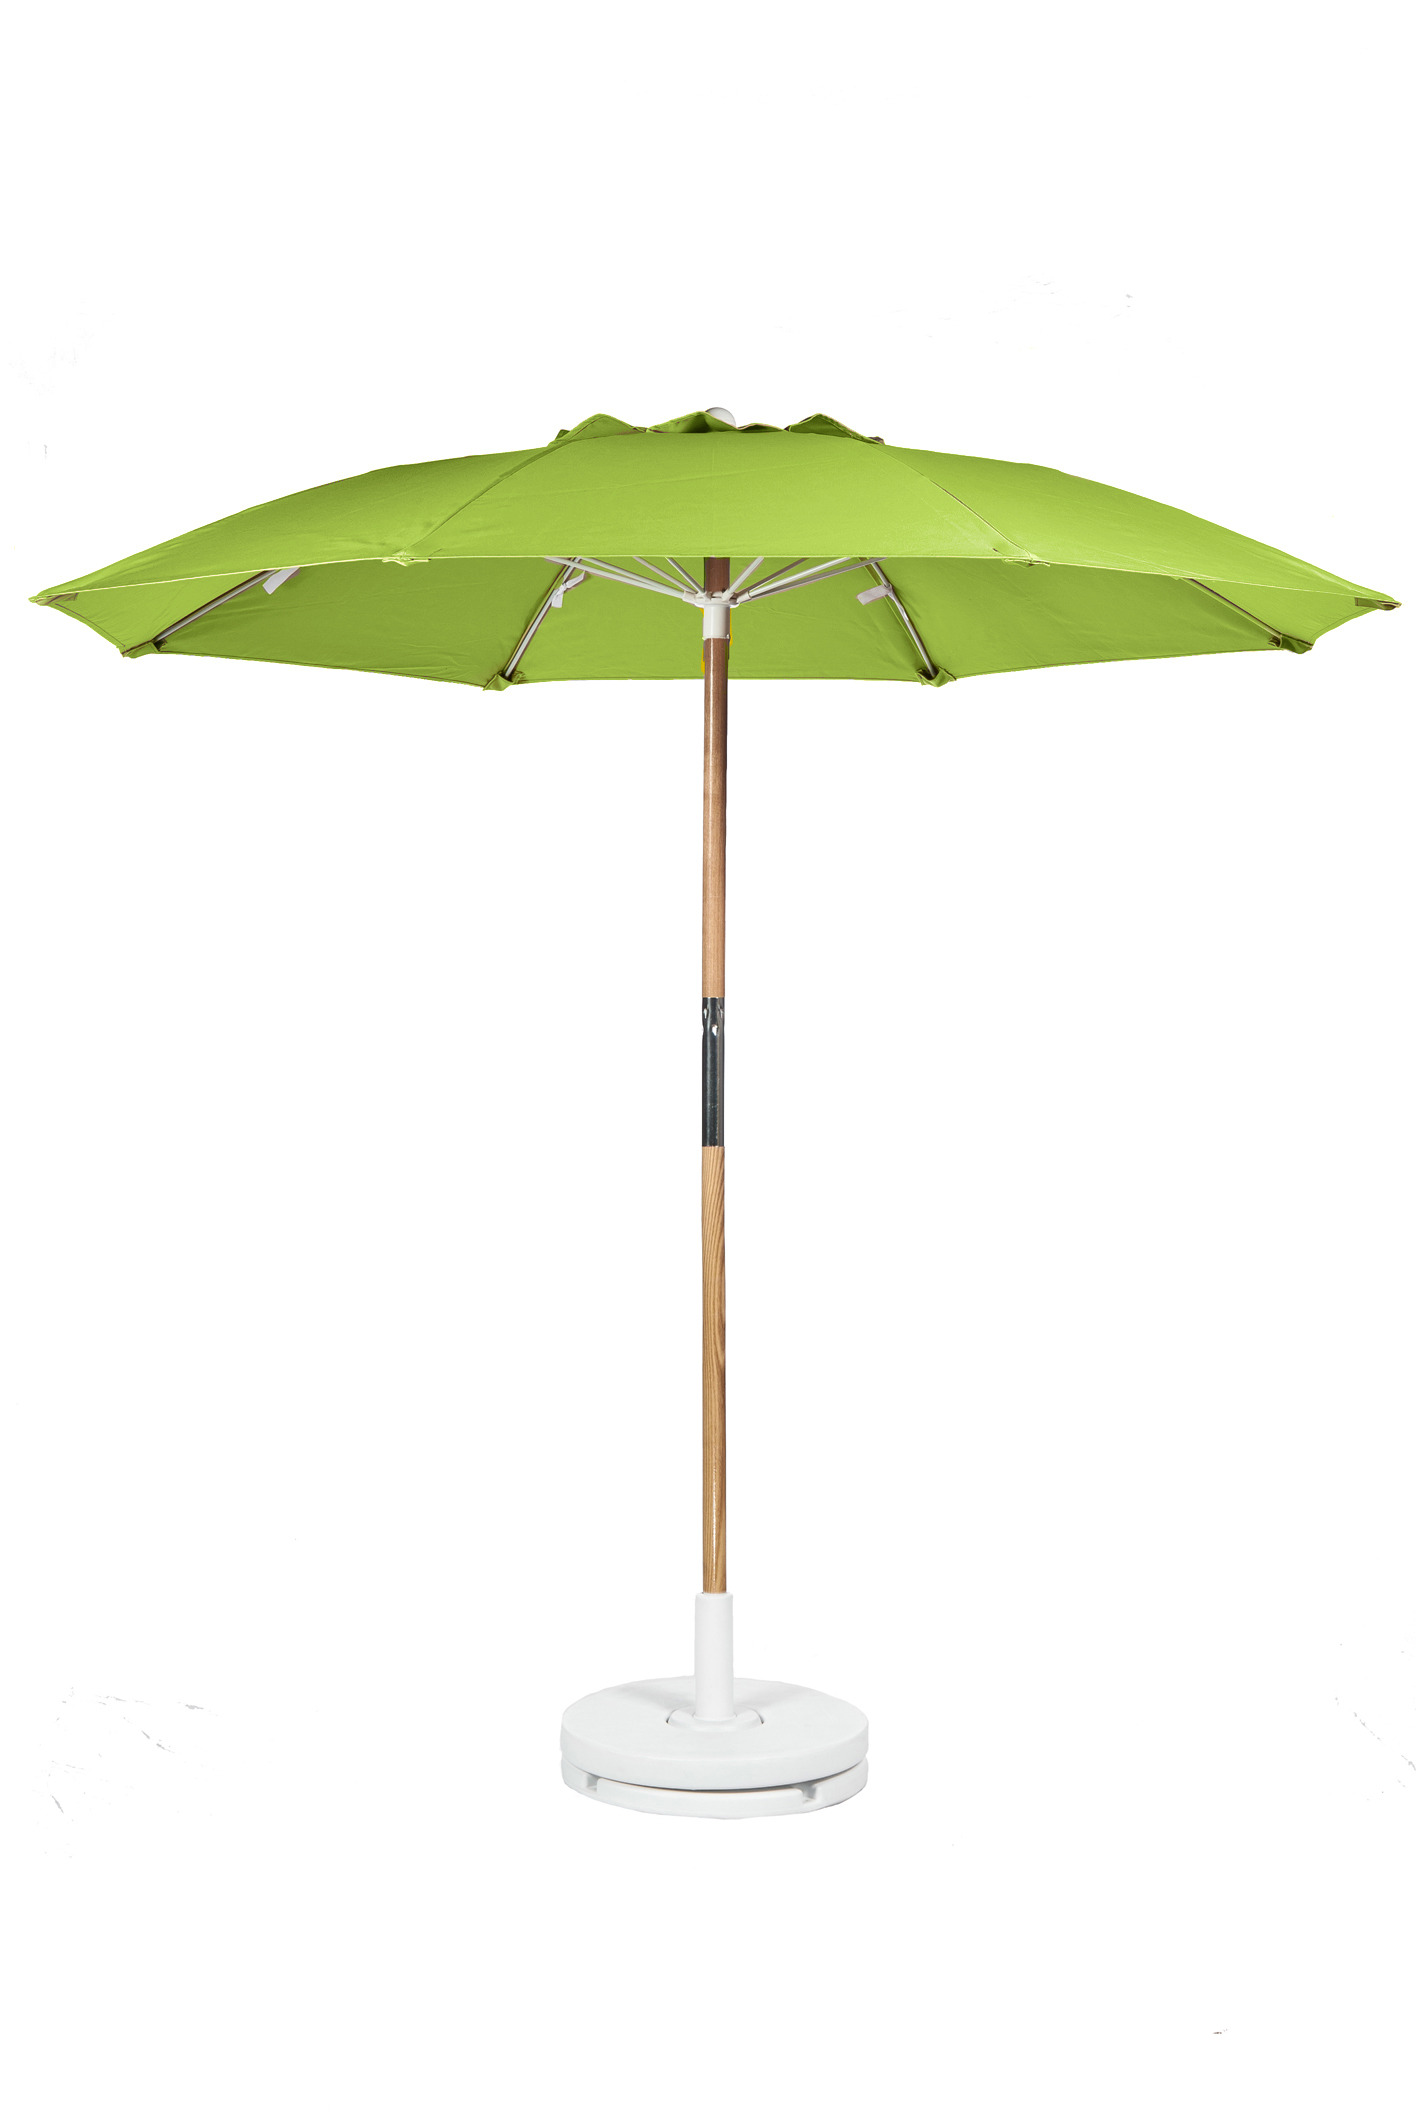 7.5′ BEACH UMBRELLA WITH FIBERGLASS SKELETON WITH VENT & NO VALANCE
Stock Fabric:$229.00
Custom Orders Available
